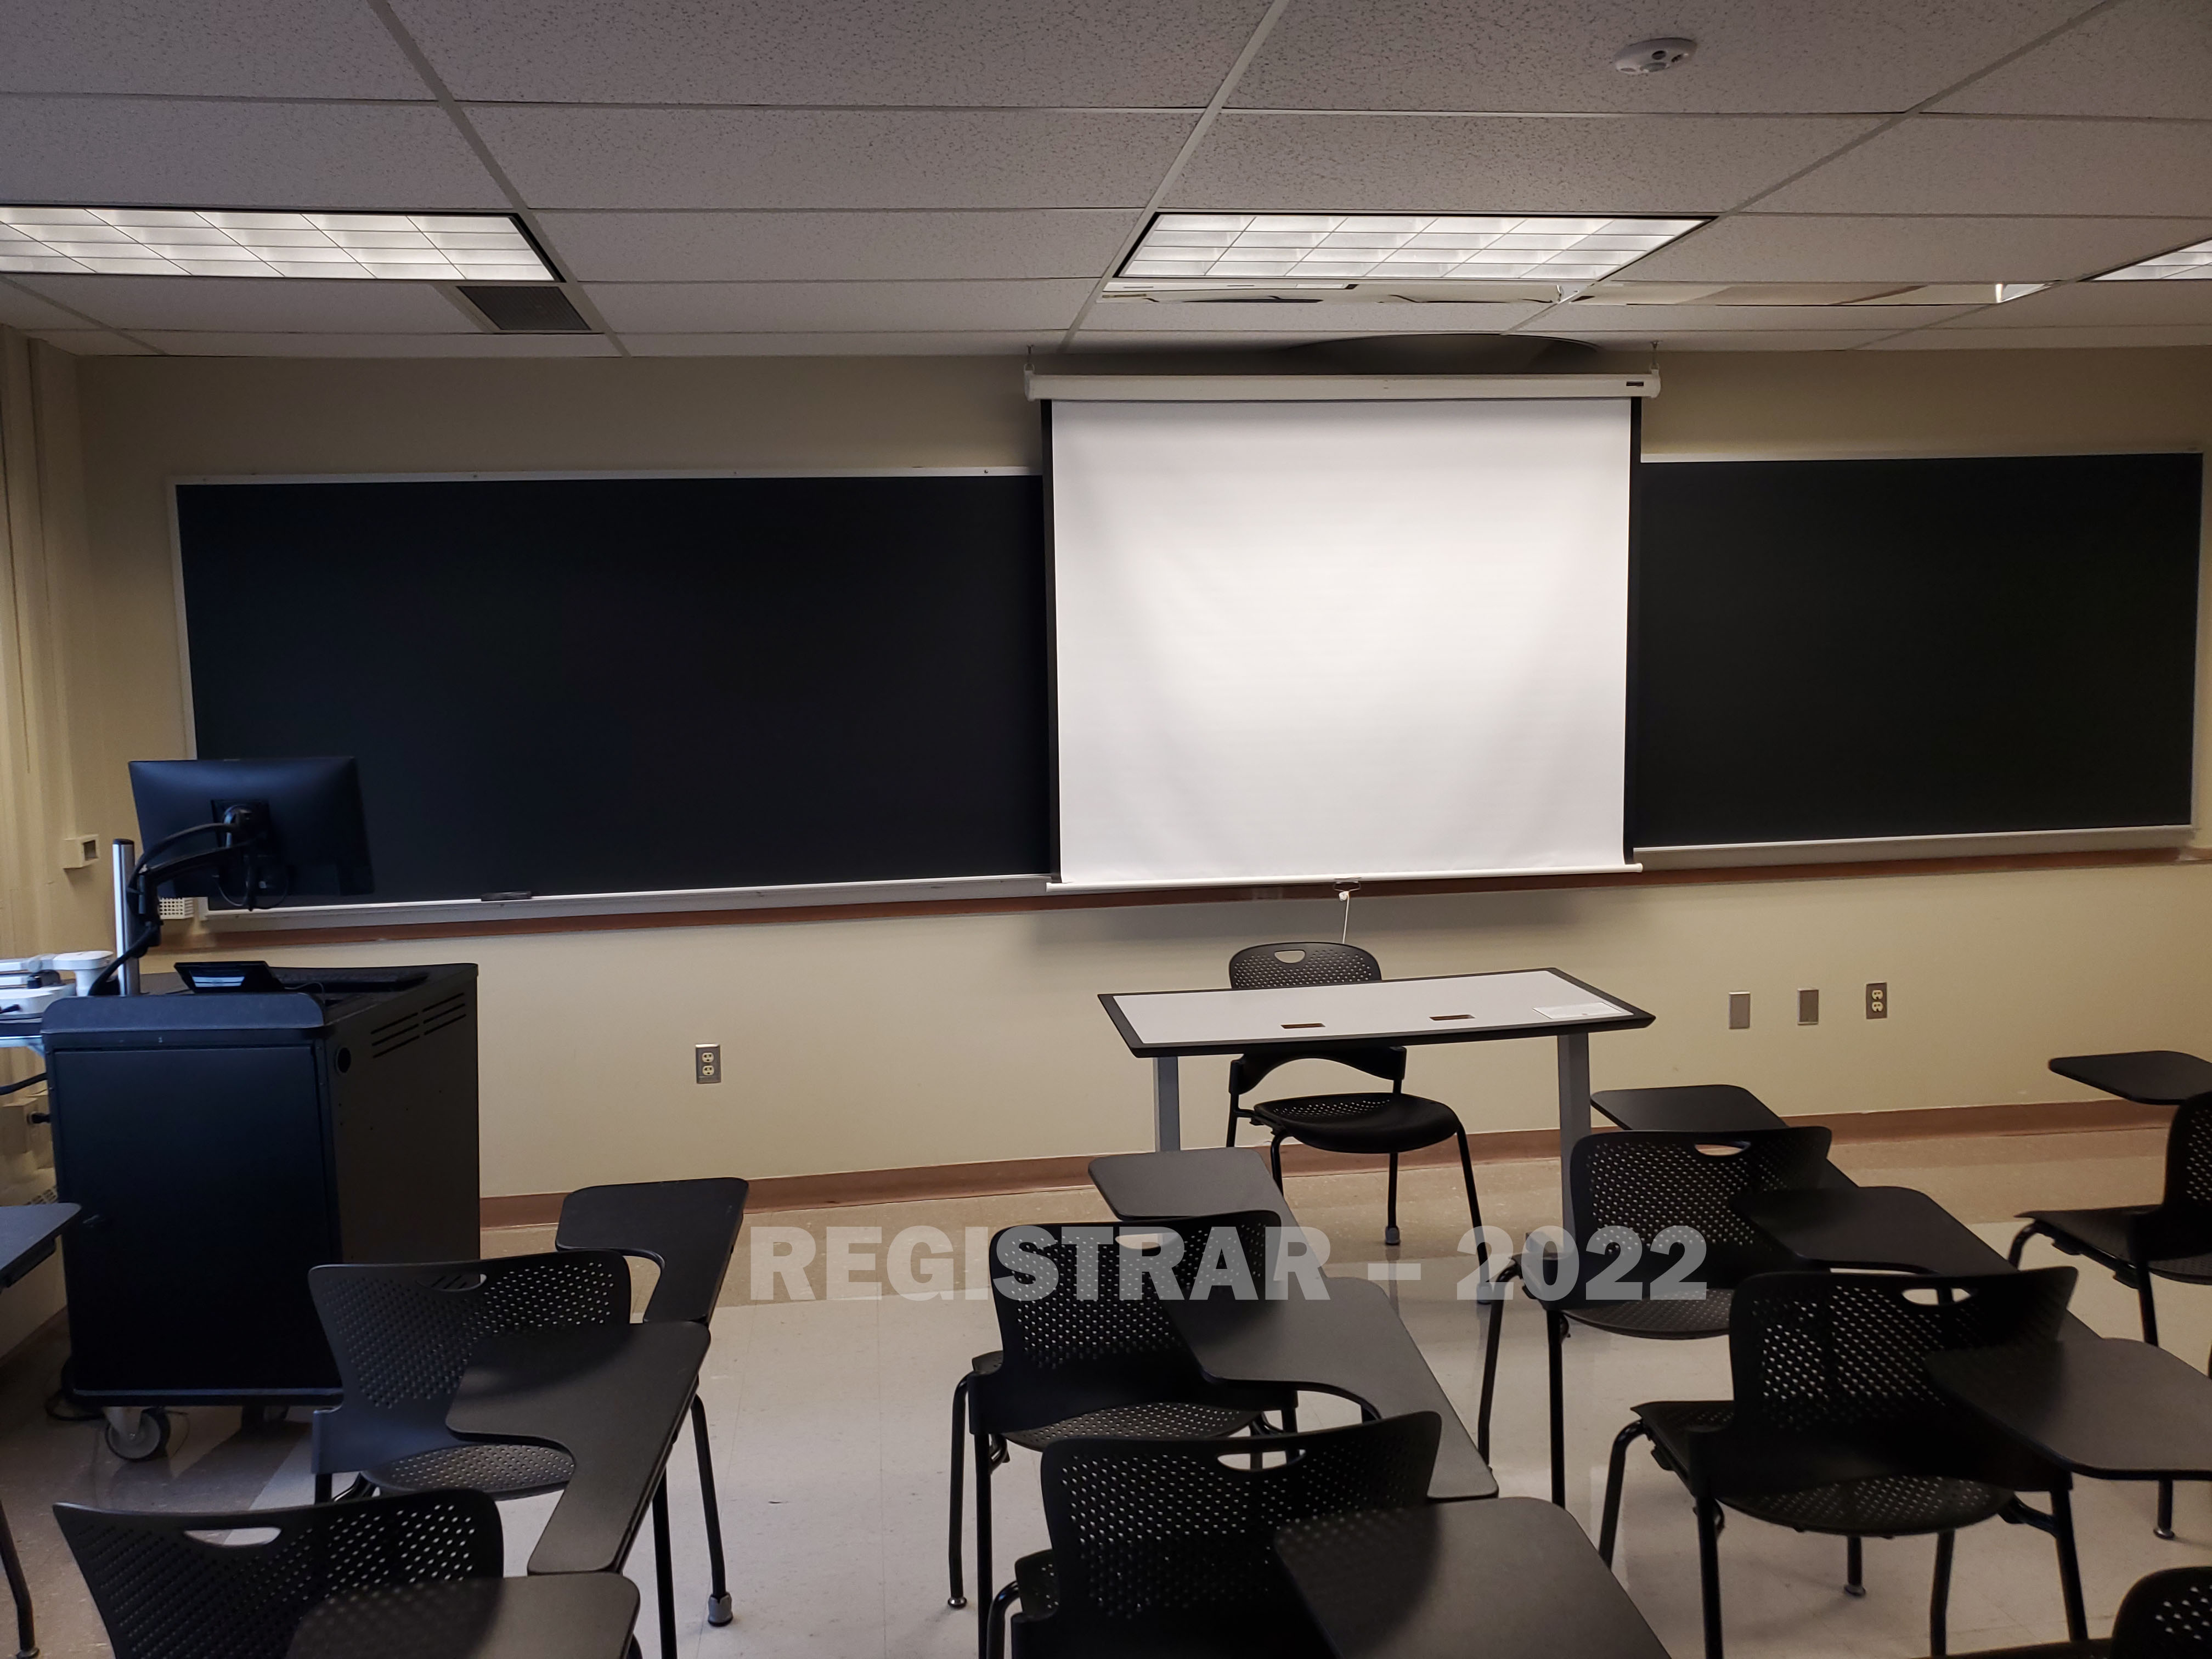 Enarson Classroom Building room 246 view from the back of the room with projector screen down